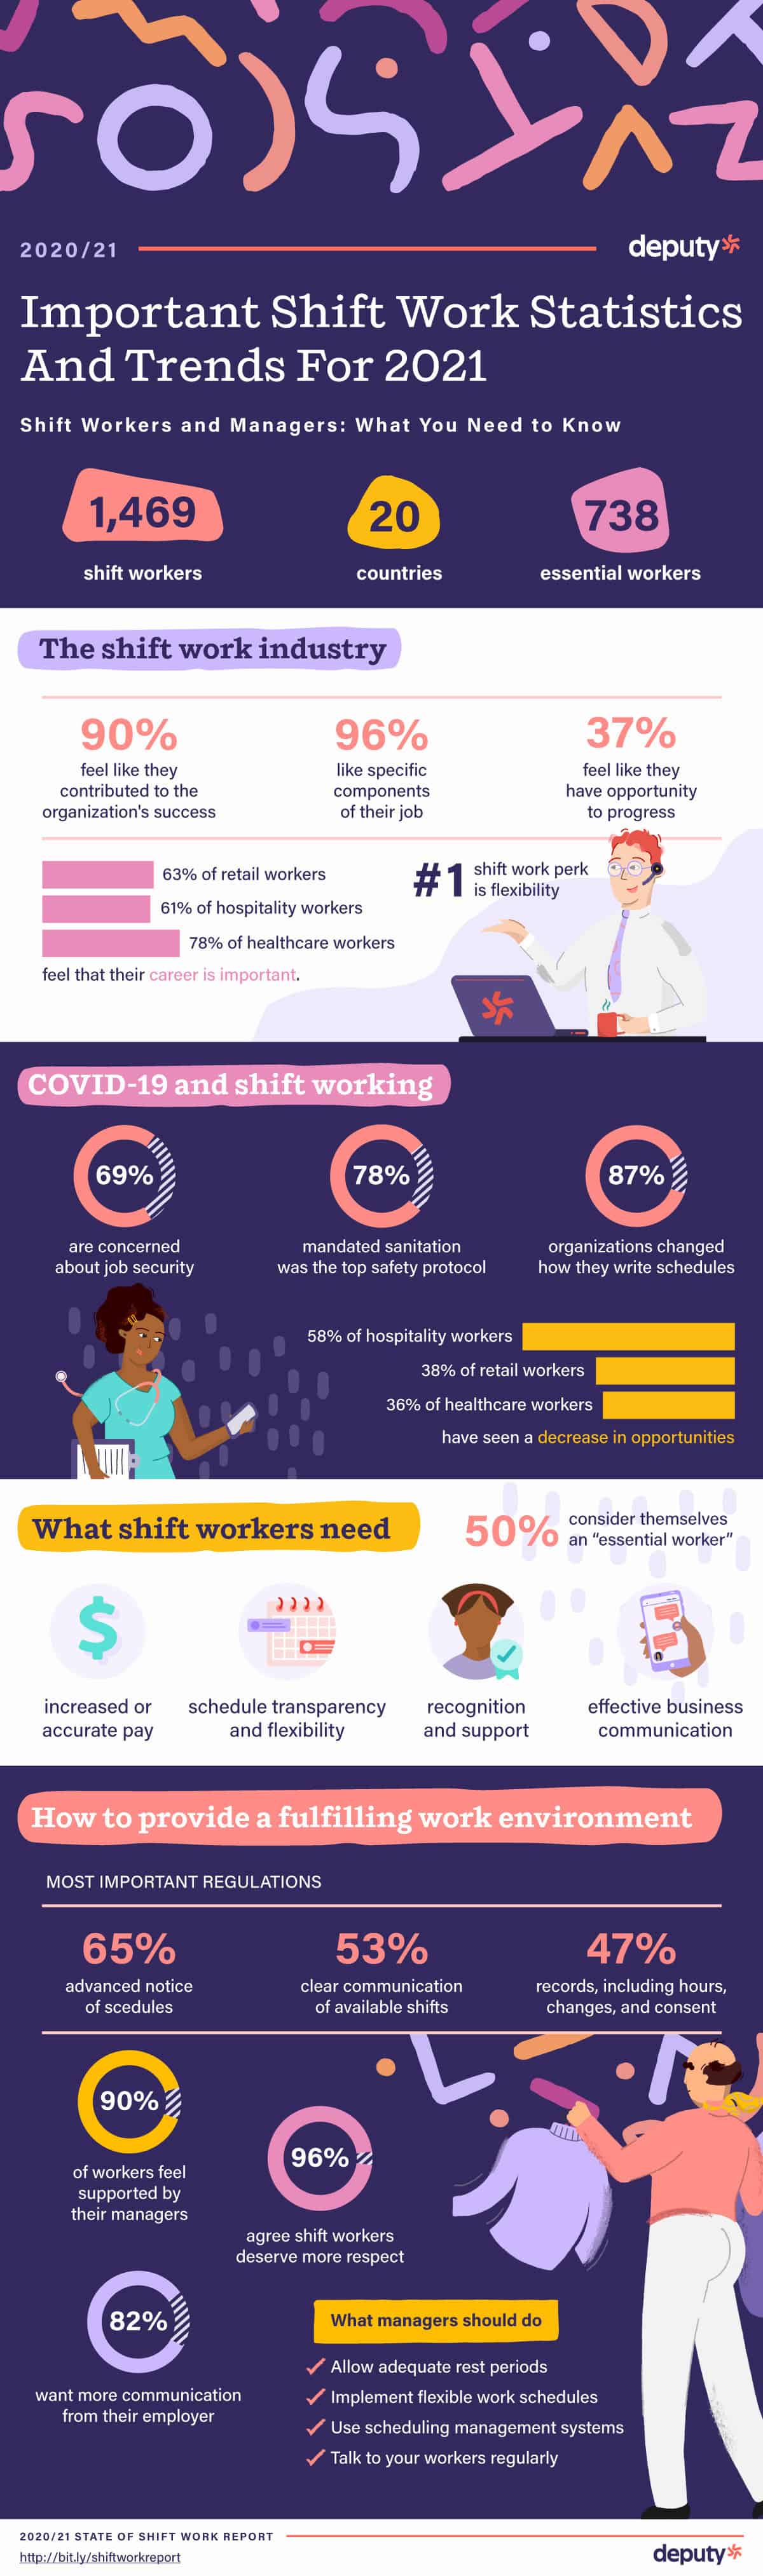 Important Shift Work Statistics and Trends for 2021